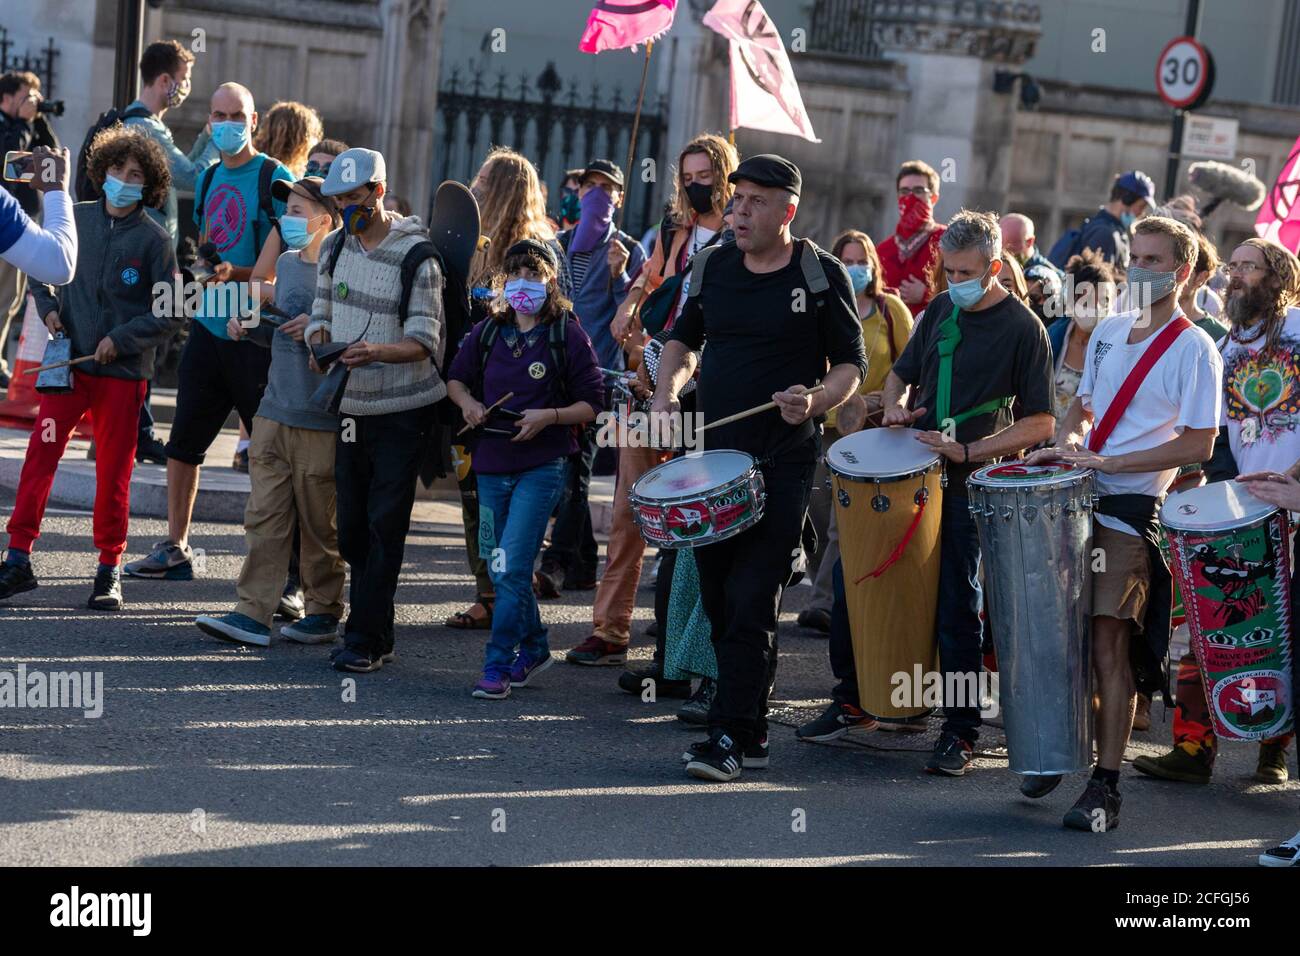 London, UK. 5th Sep, 2020. An Extinction Rebellion (XR) 'March for Amazonia' from Parliament Square to the Brazilian Embassy Credit: Ian Davidson/Alamy Live News Stock Photo